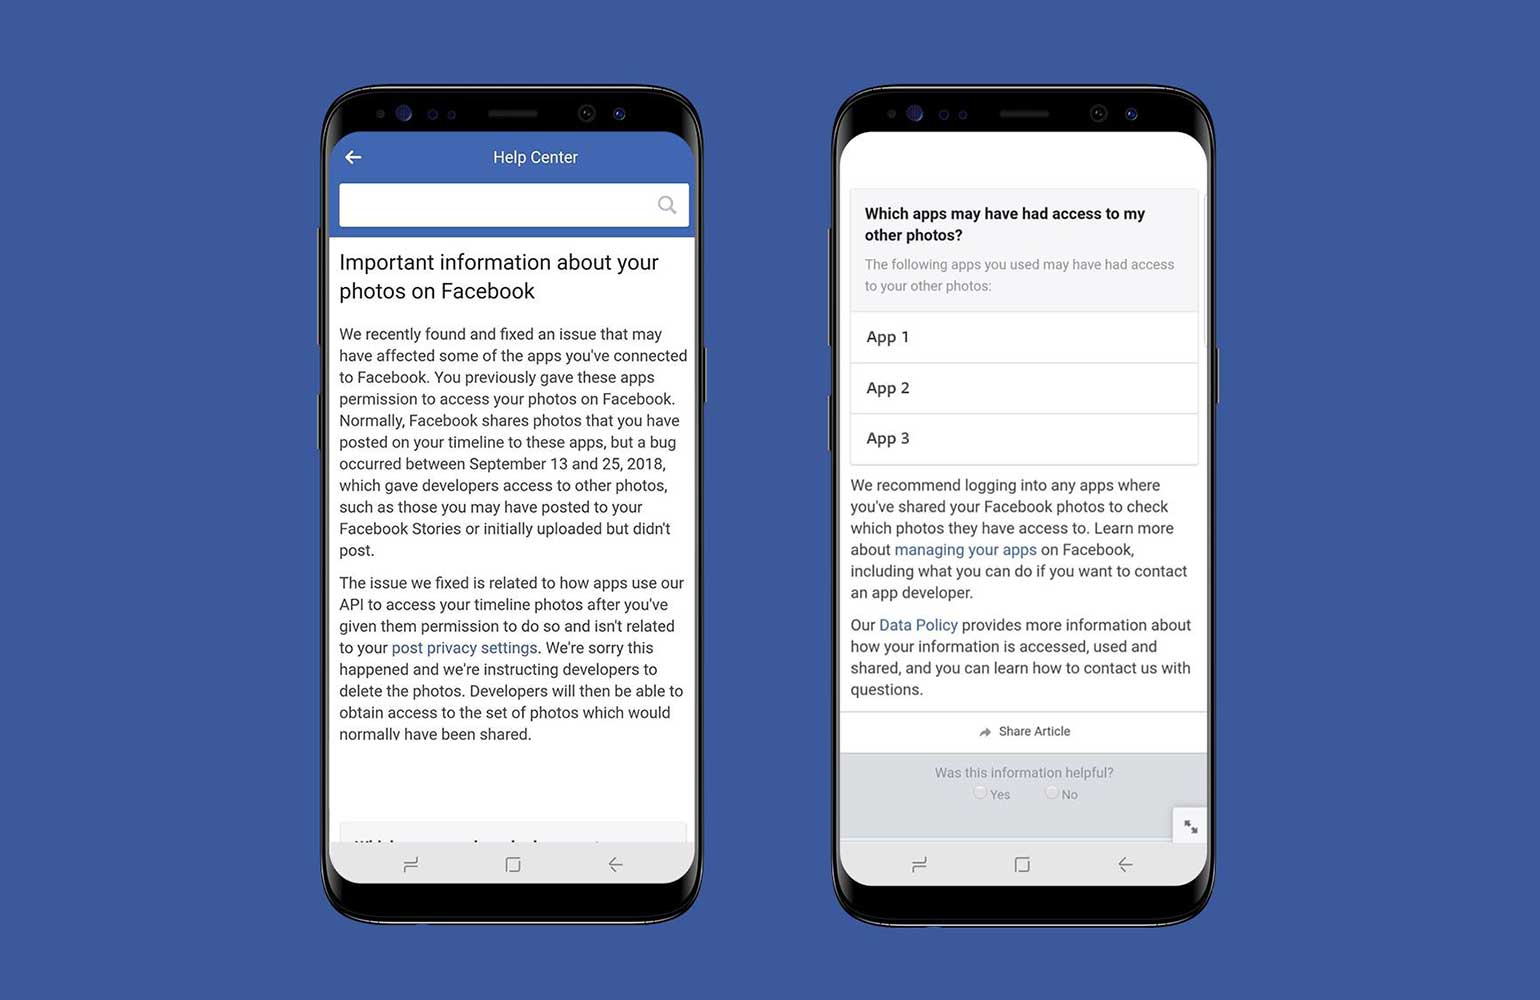 Facebook API bug exposed user photos to third-party apps 48789954_586266551832240_8195718961447305216_n.jpg?_nc_cat=109&_nc_ht=scontent-dfw5-1.jpg